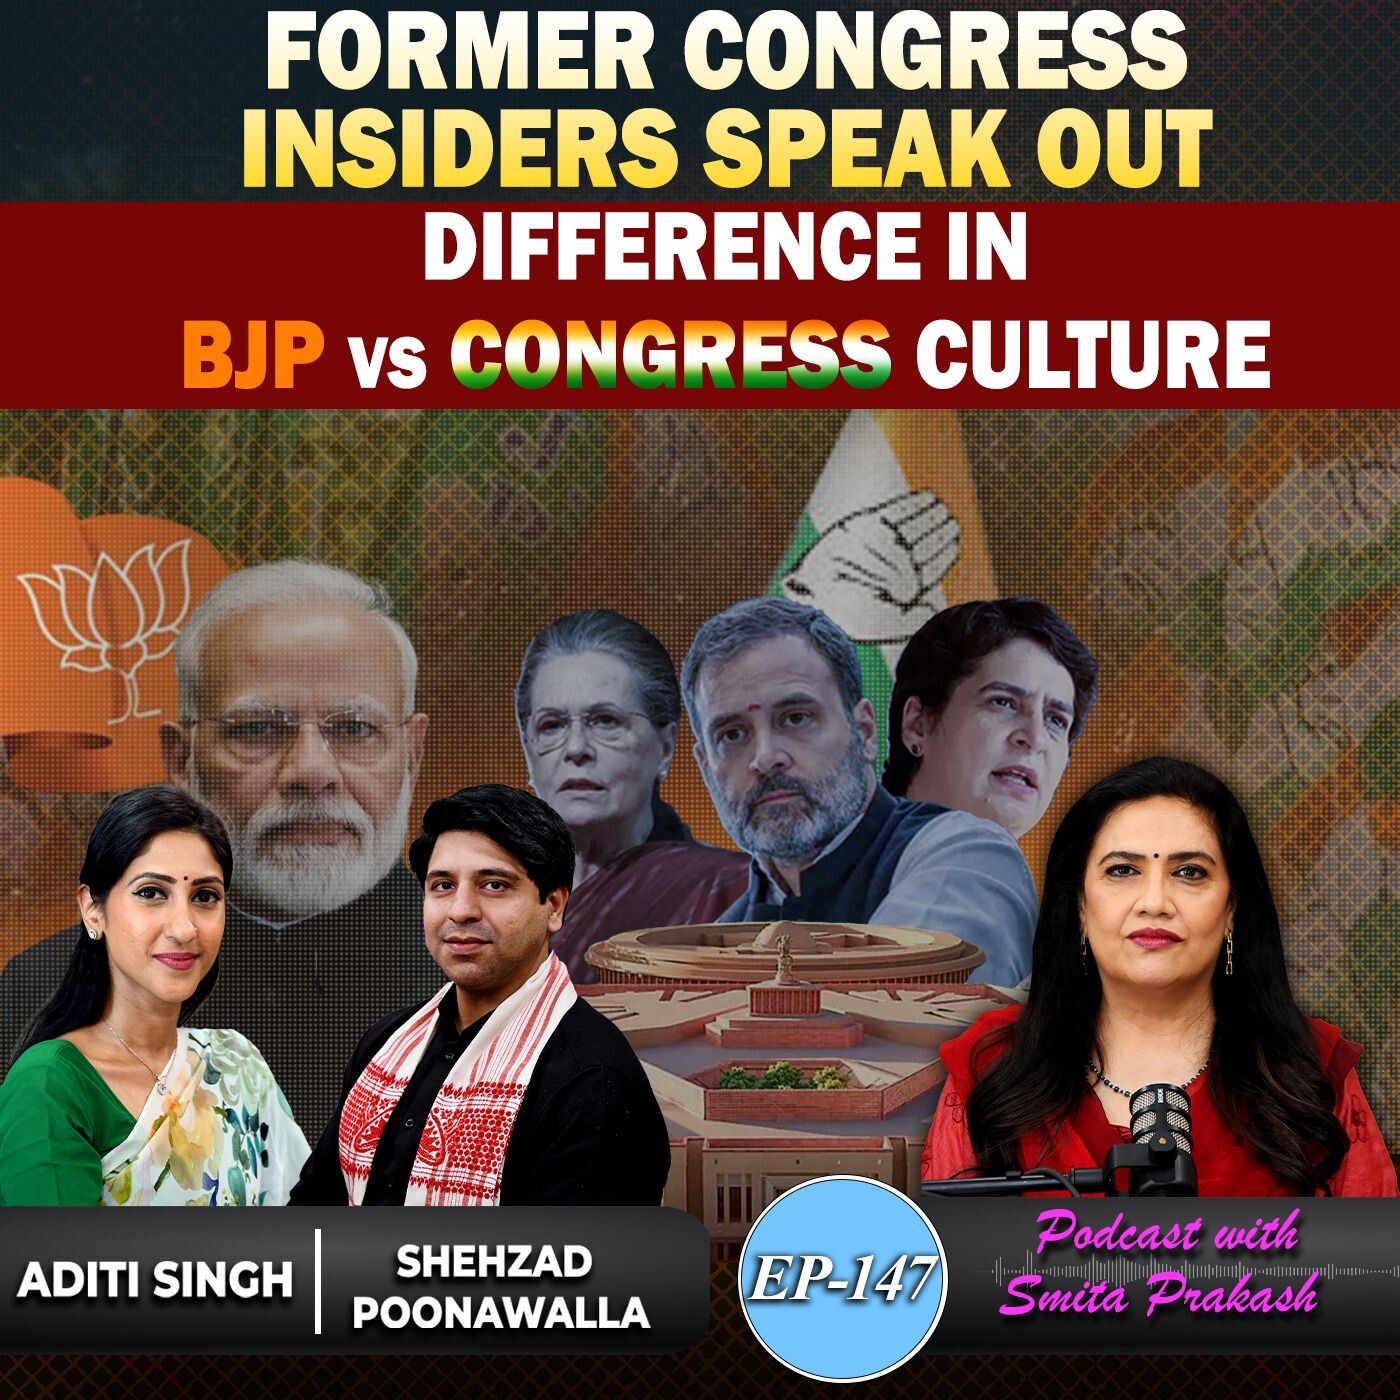 EP 147 - Insider Insights: BJP Vs Congress Culture Differences with Aditi Singh & Shehzad Poonawalla